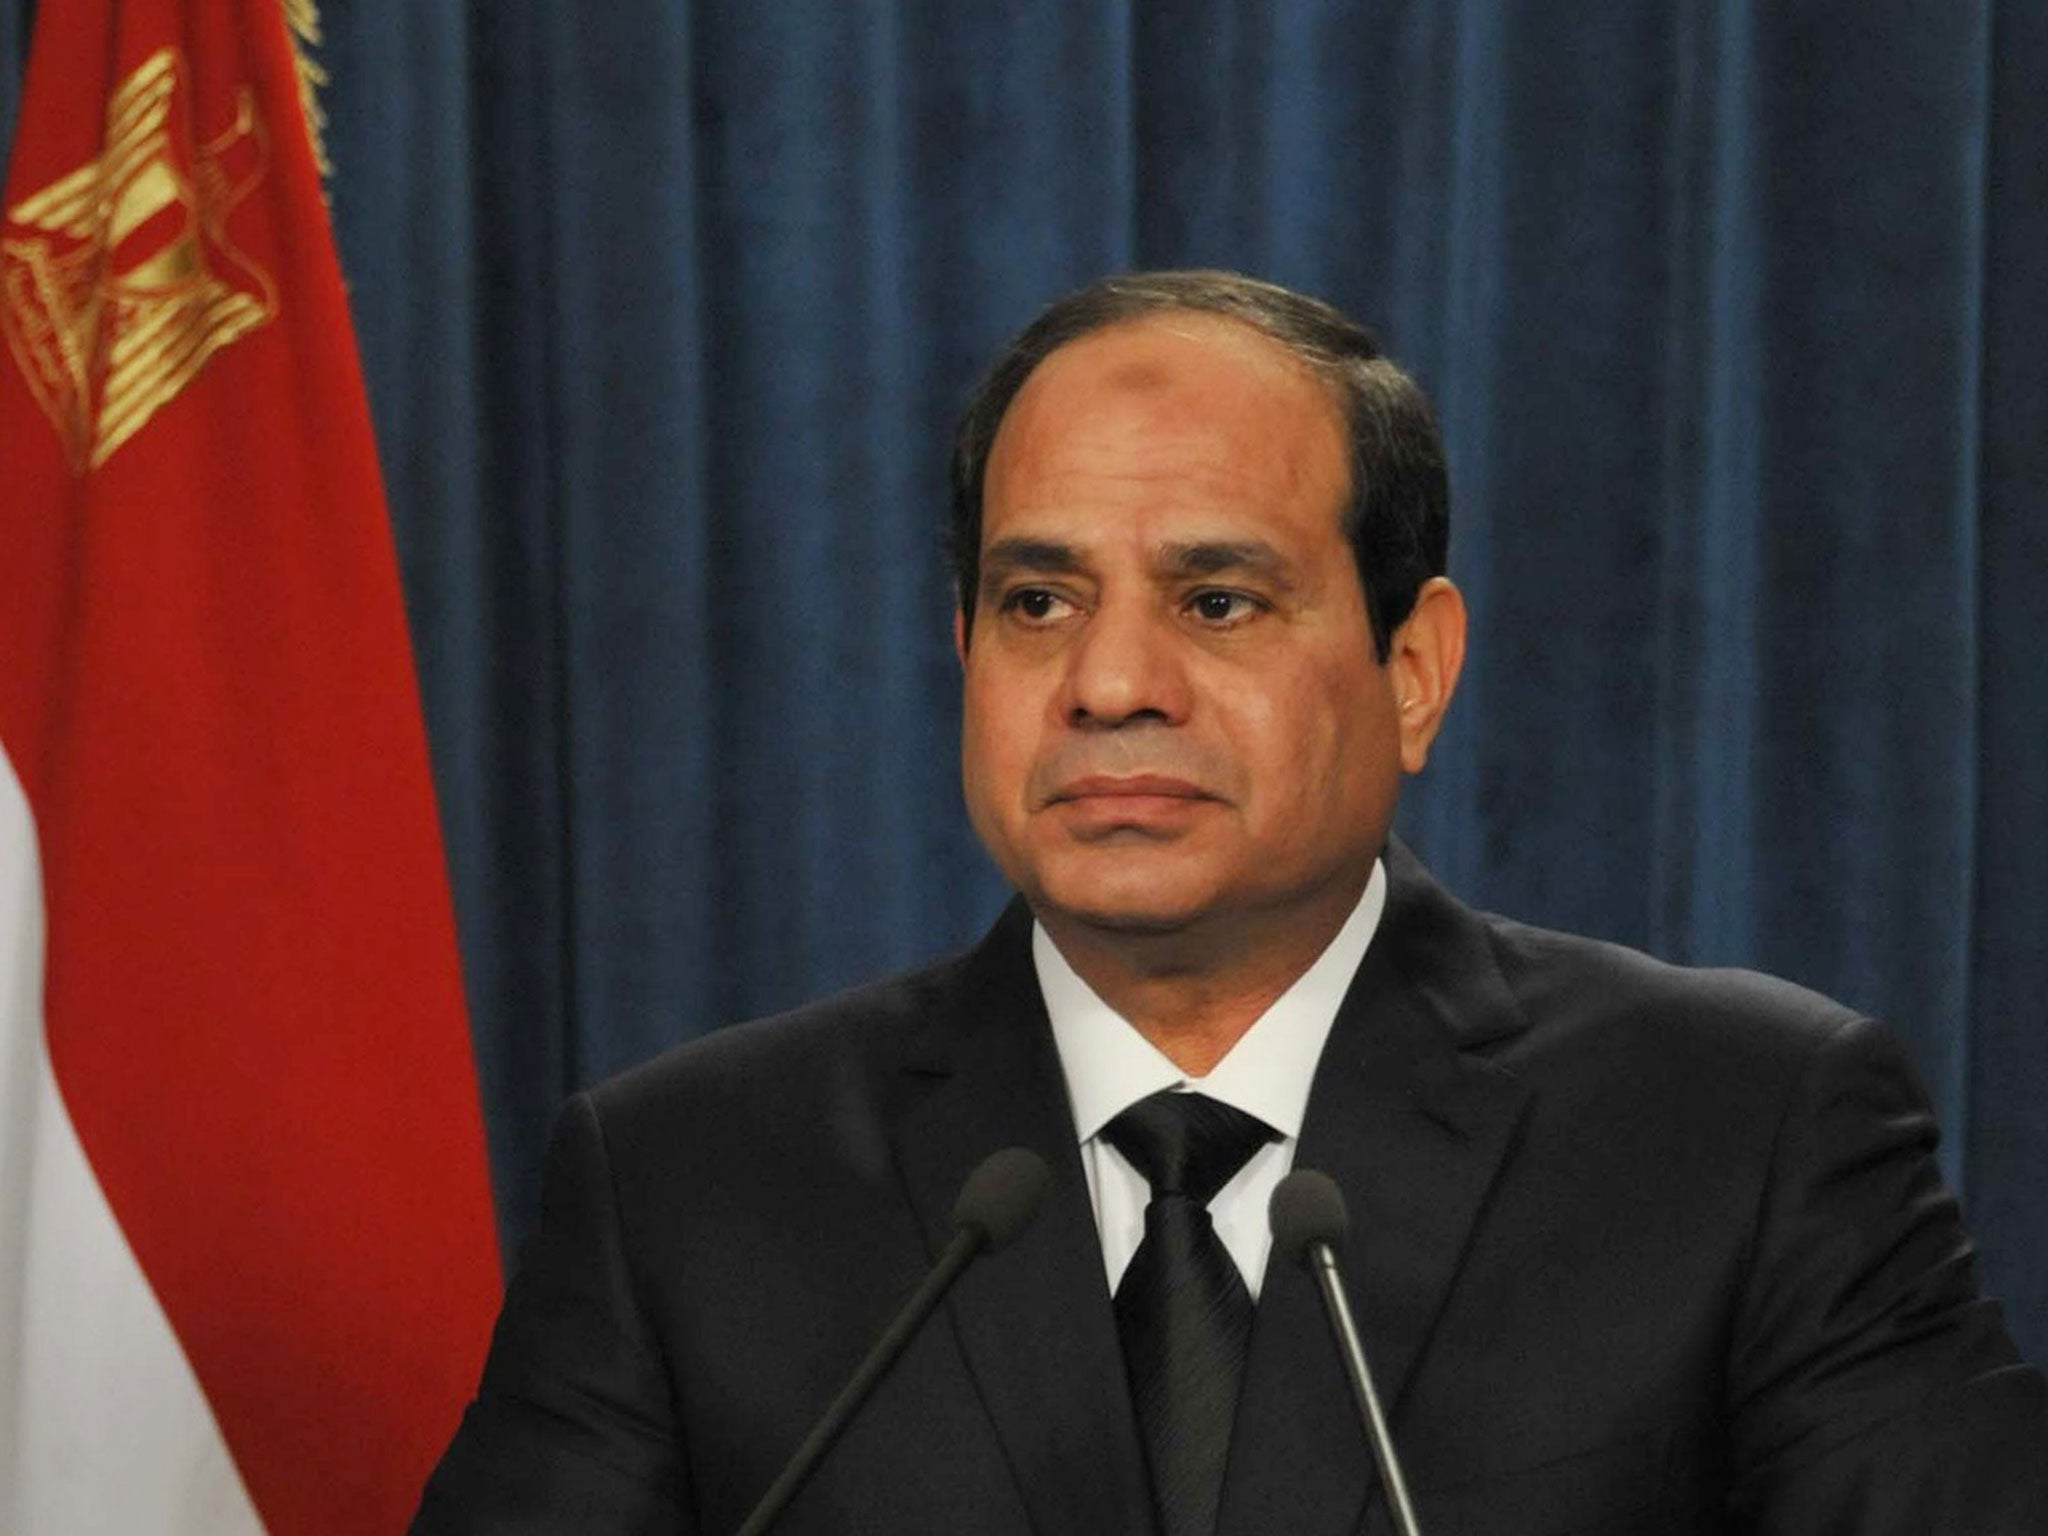 President Abdel Fattah al-Sisi makes a statement after Isis released a video purporting to show the beheading of 21 Coptic Christian hostages